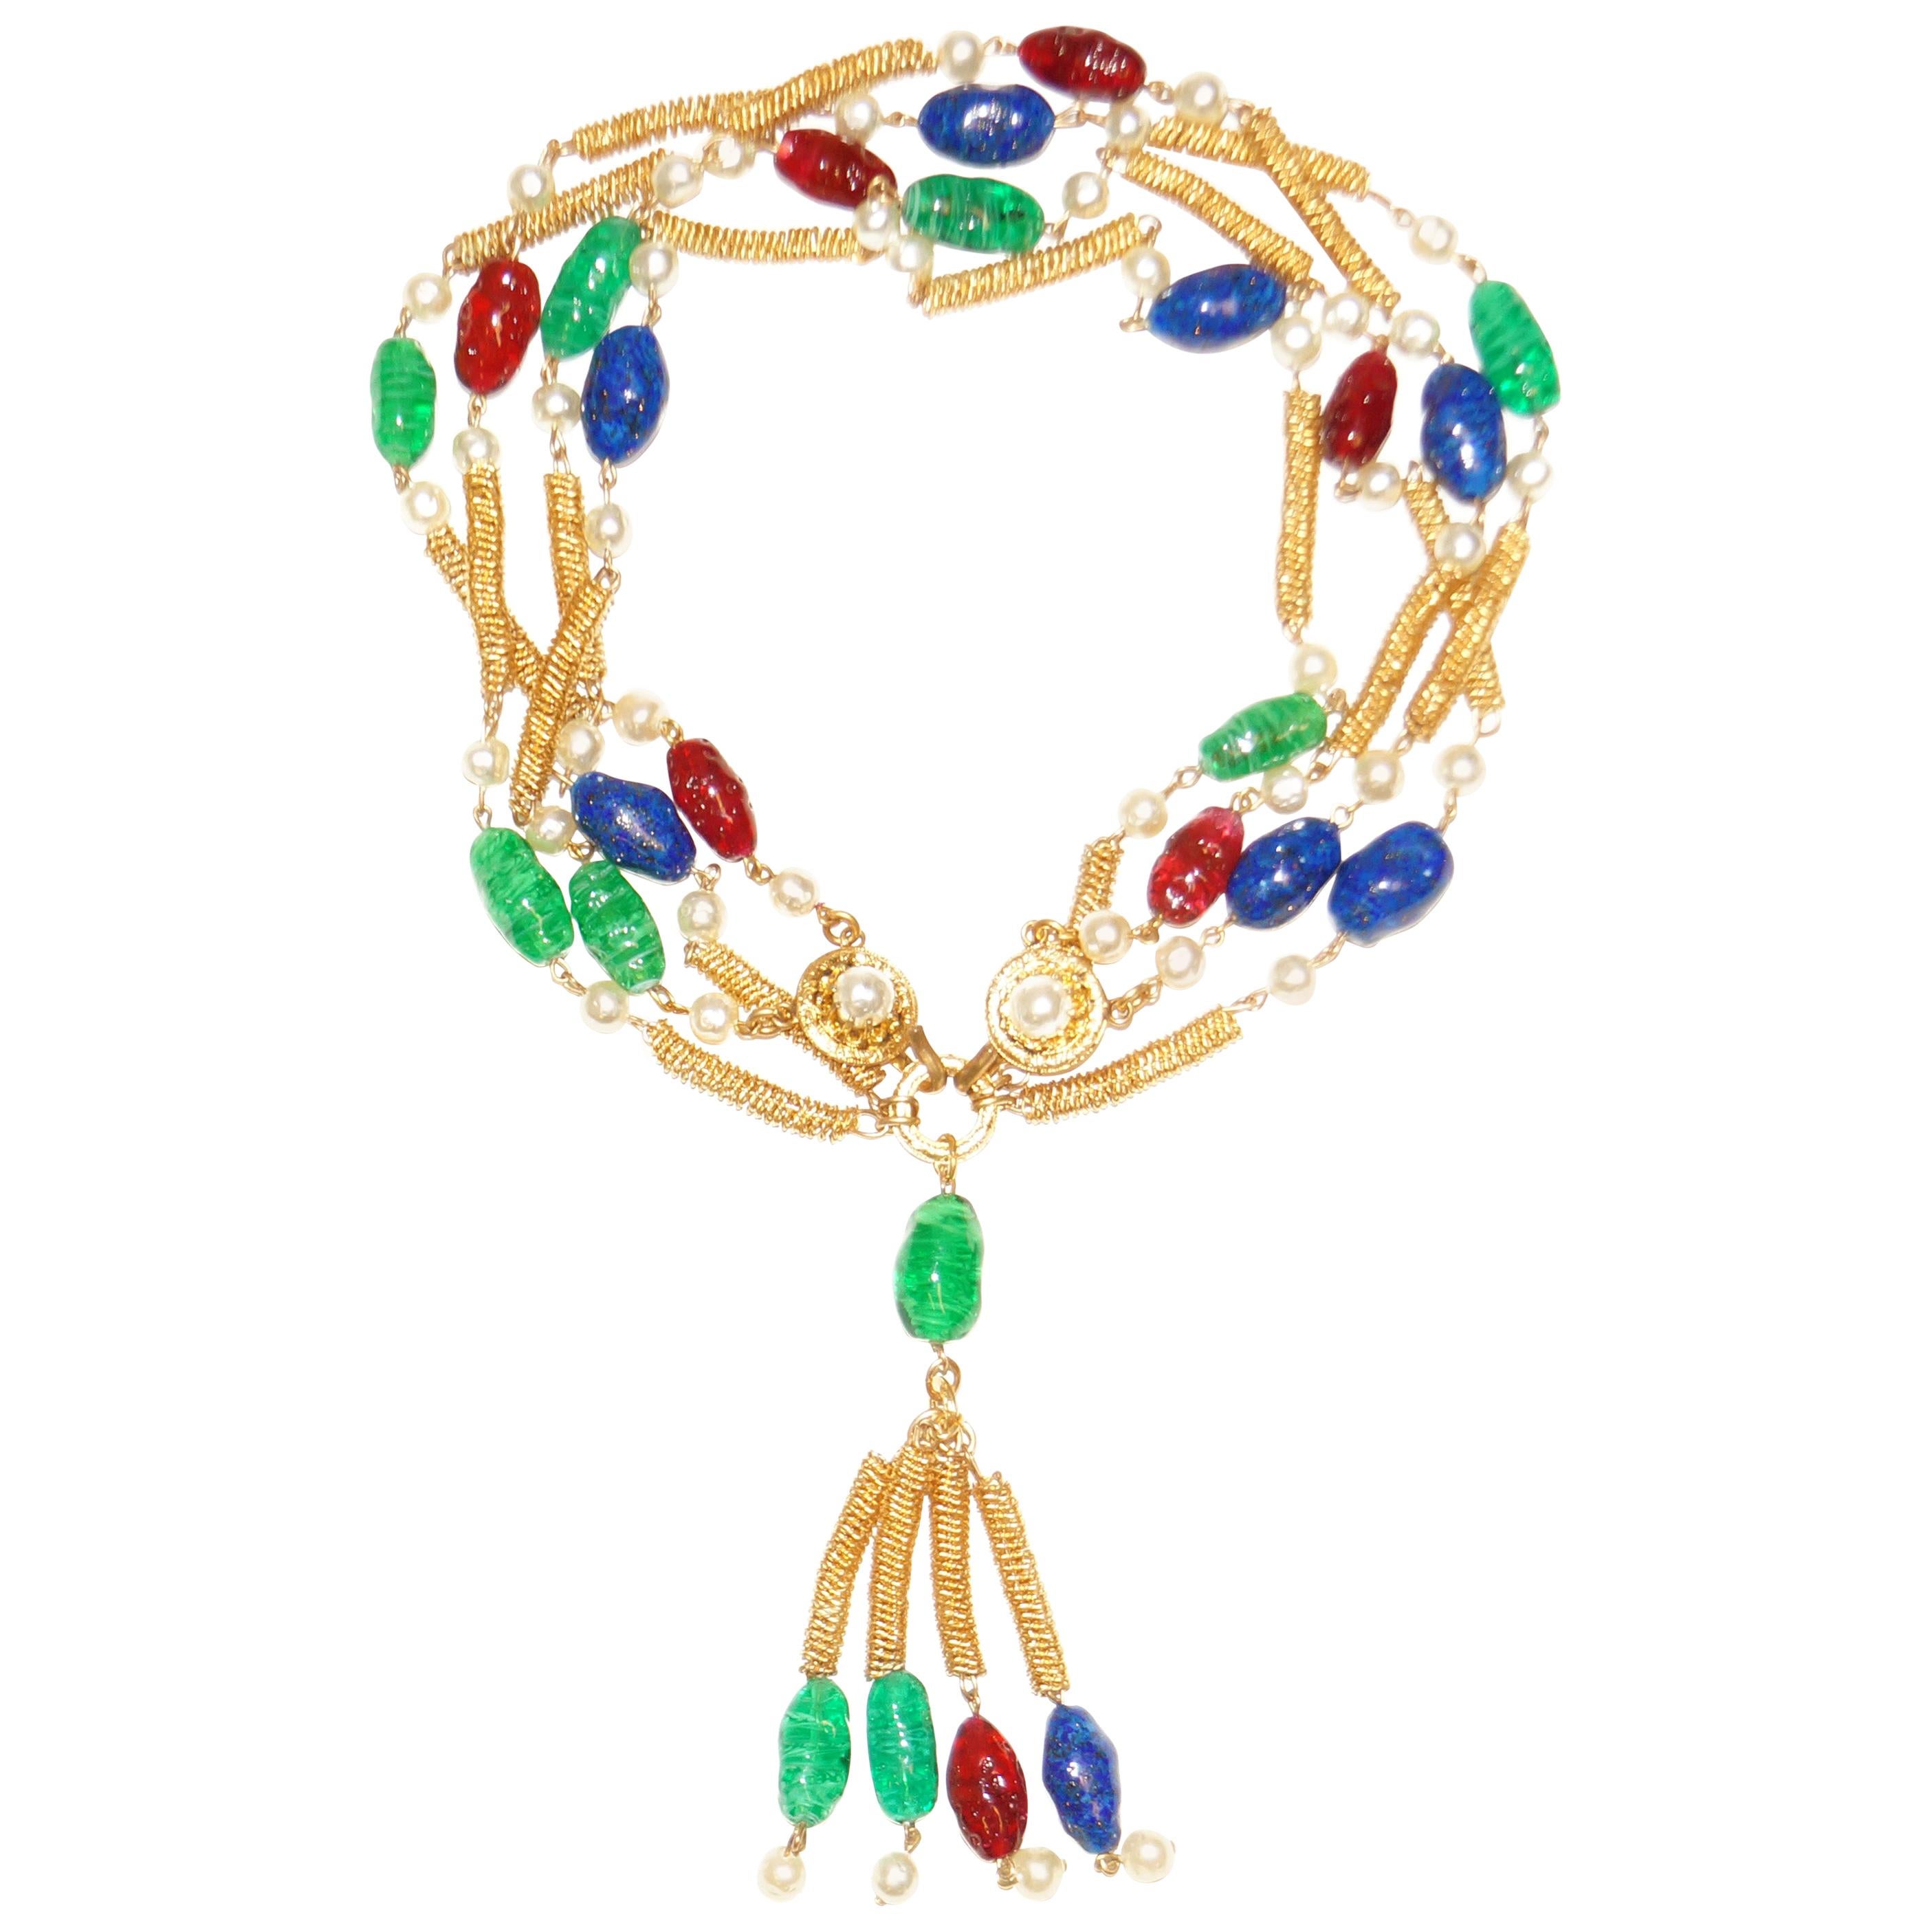  1960’s Chanel Gripoix Four Strand Necklace with Tassel Drop